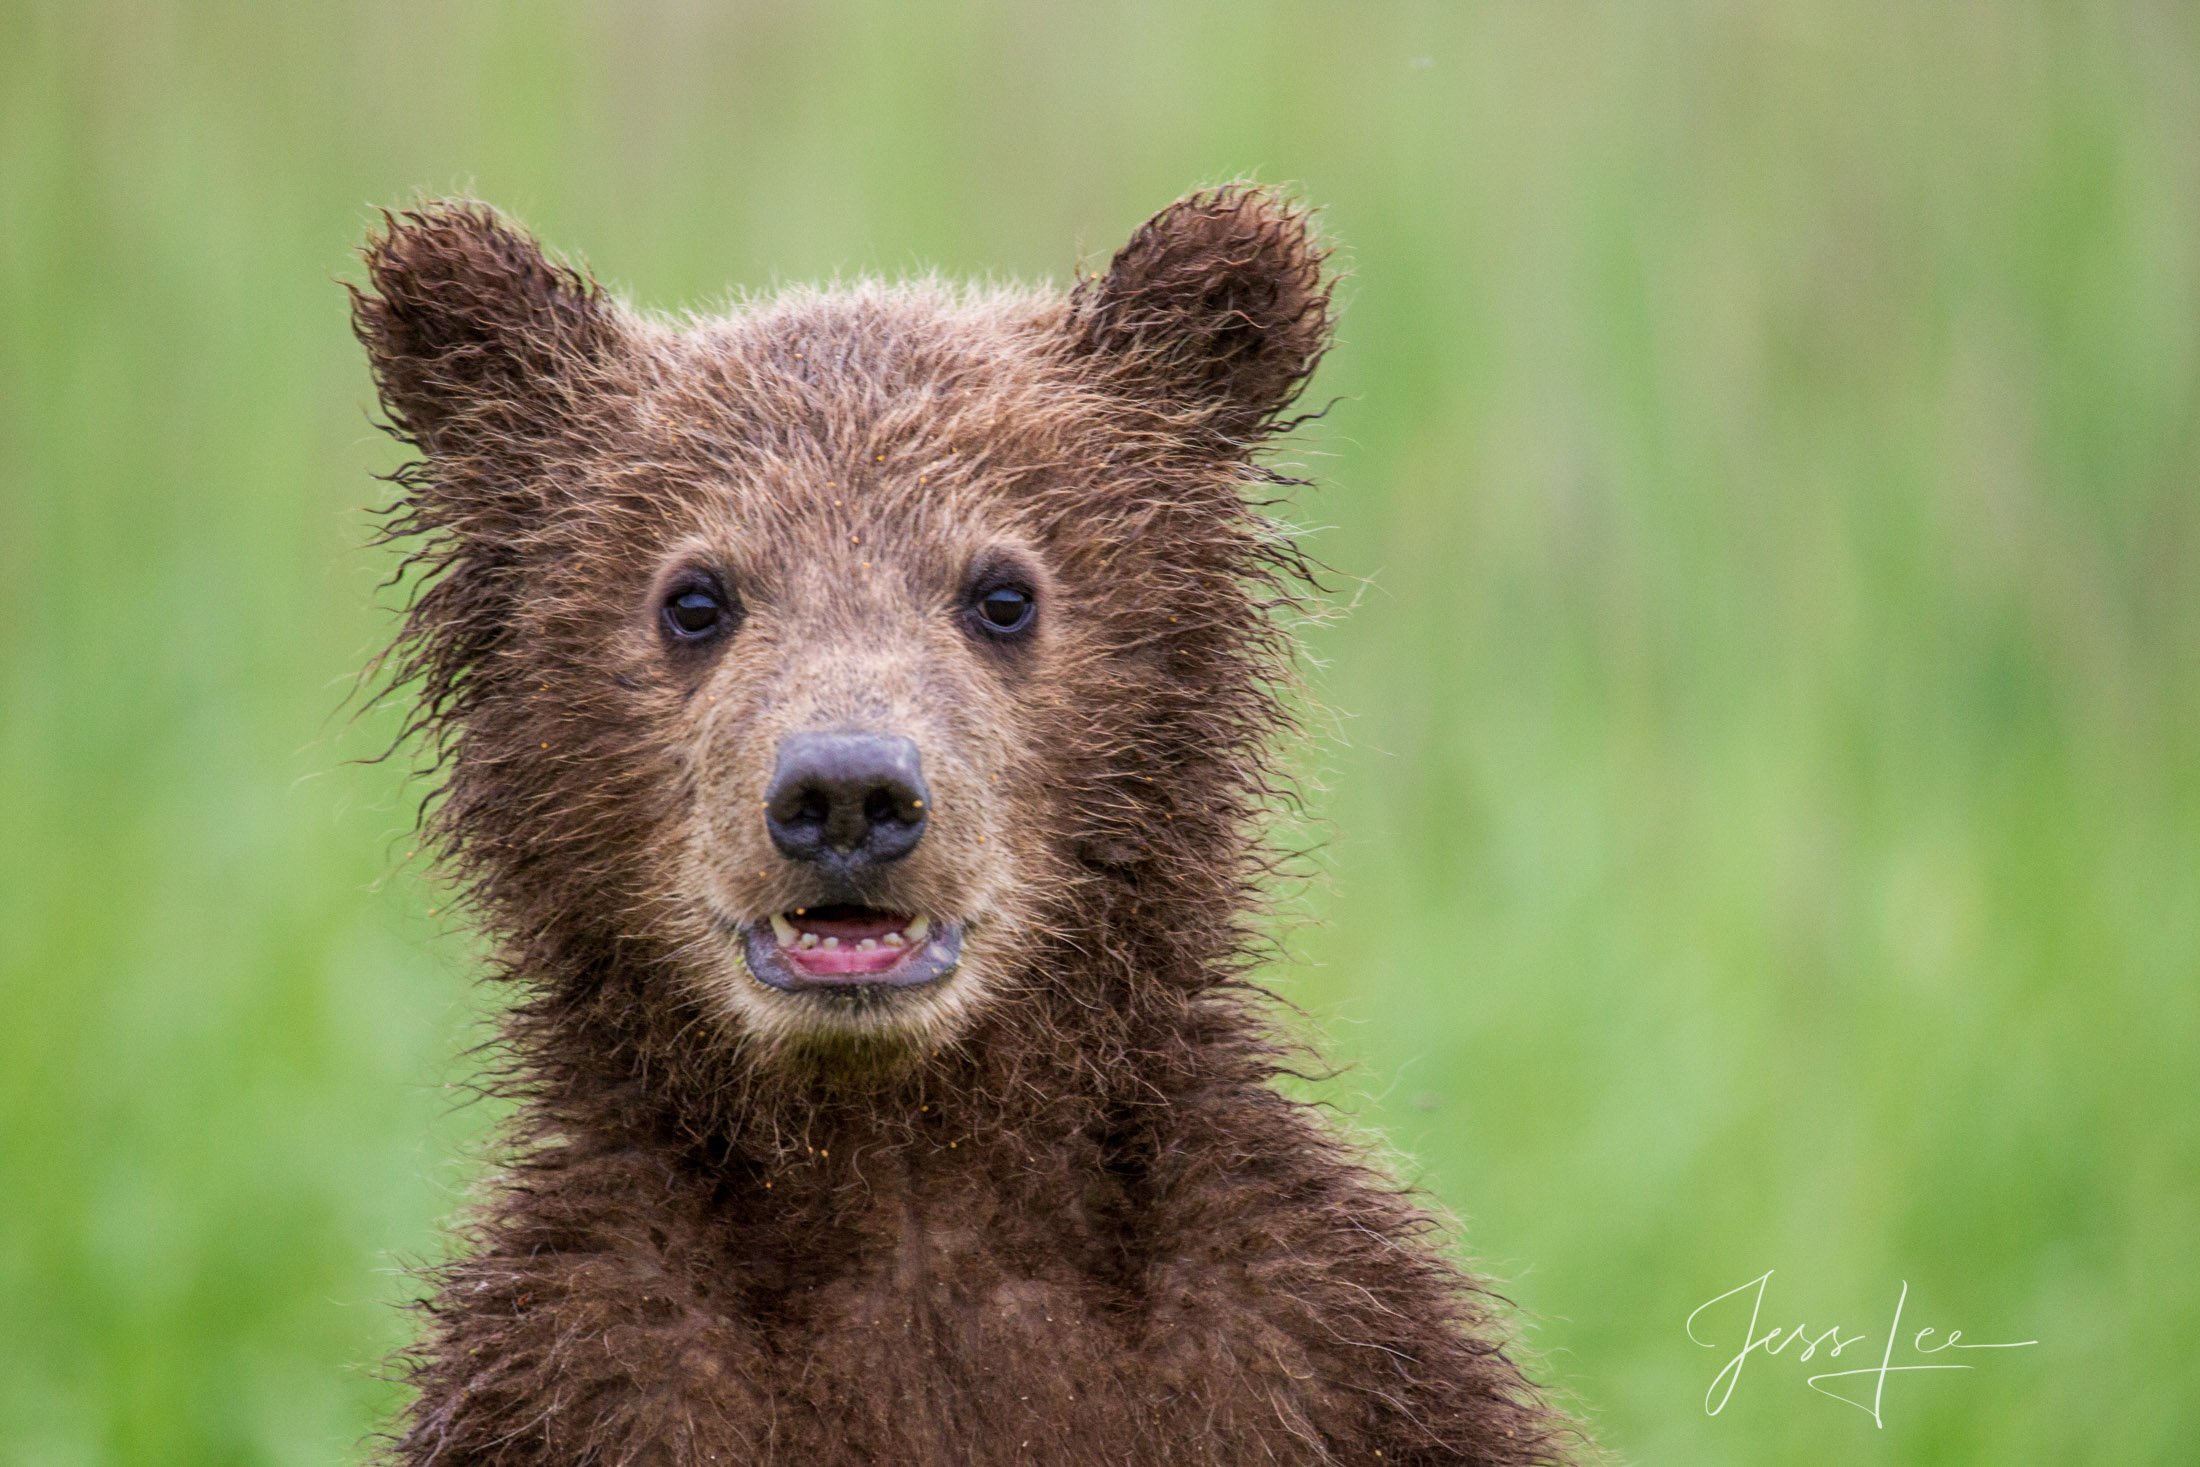 Picture of a Grizzly Bear, Limited Edition Fine Art Photography Print From Jess Lee